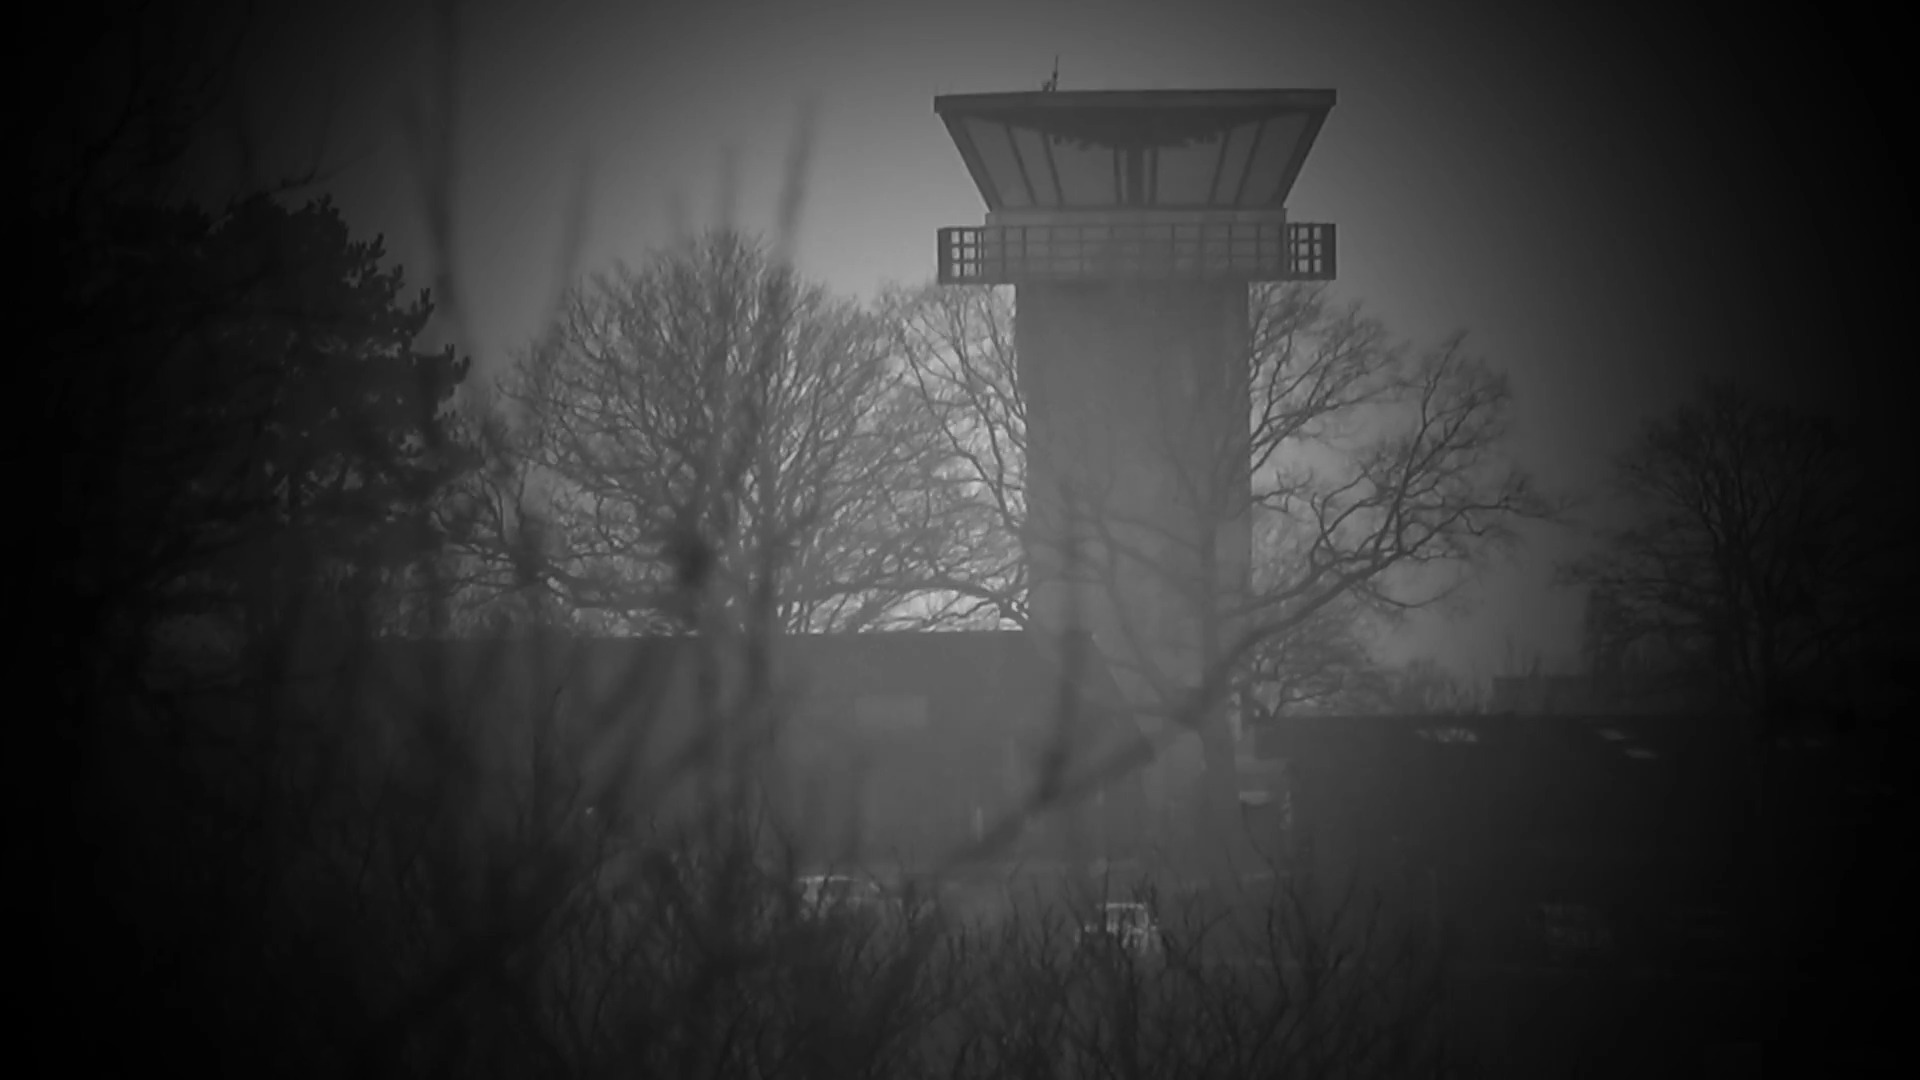 Picture of the flight control tower at Flyvestation Værløse. Effects has been applied to give it a cold war theme.